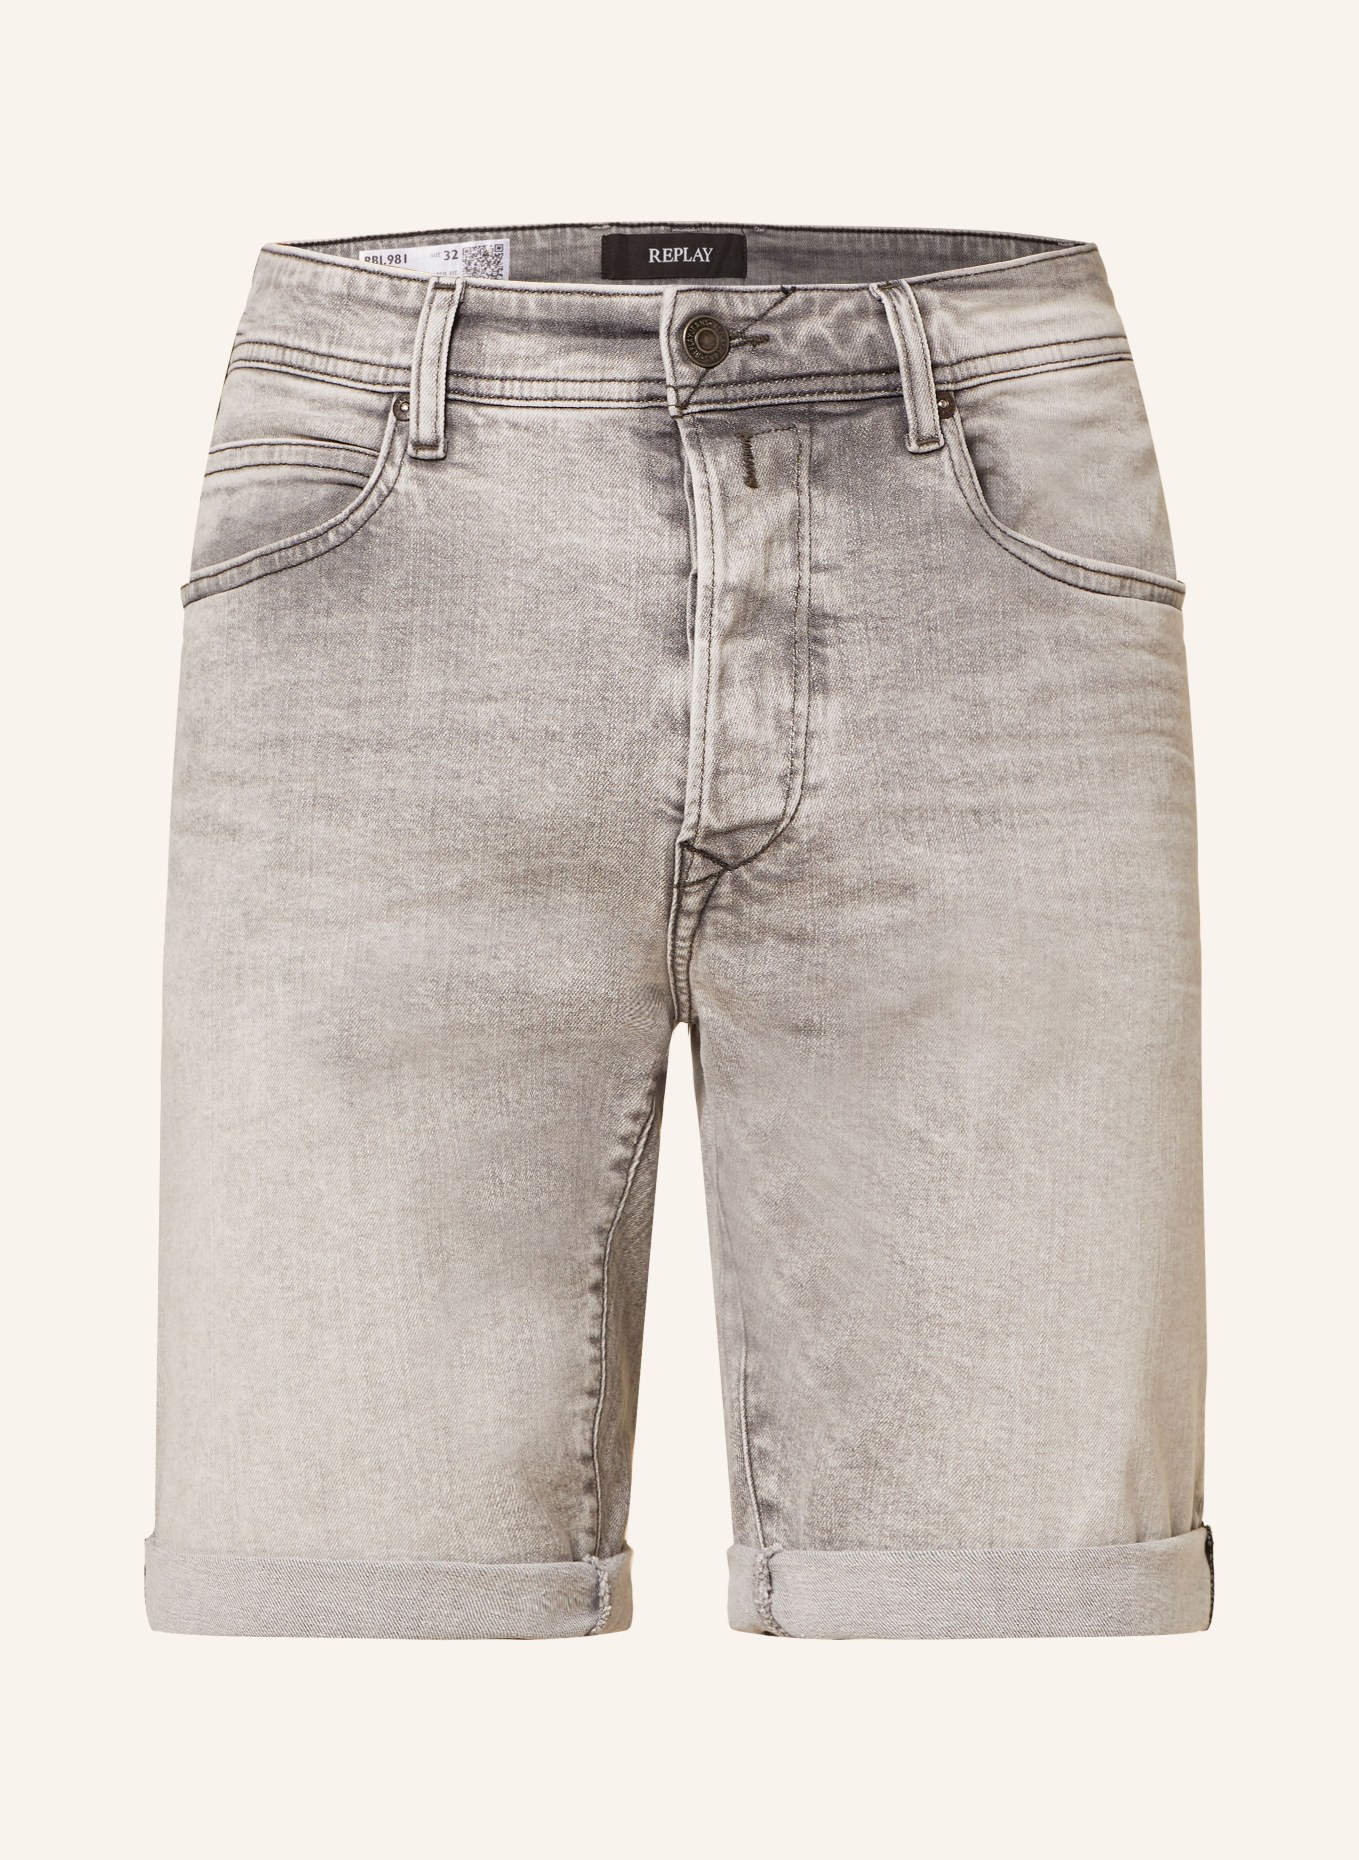 REPLAY Jeansshorts 573 Tapered Fit, Farbe: 095 light grey (Bild 1)